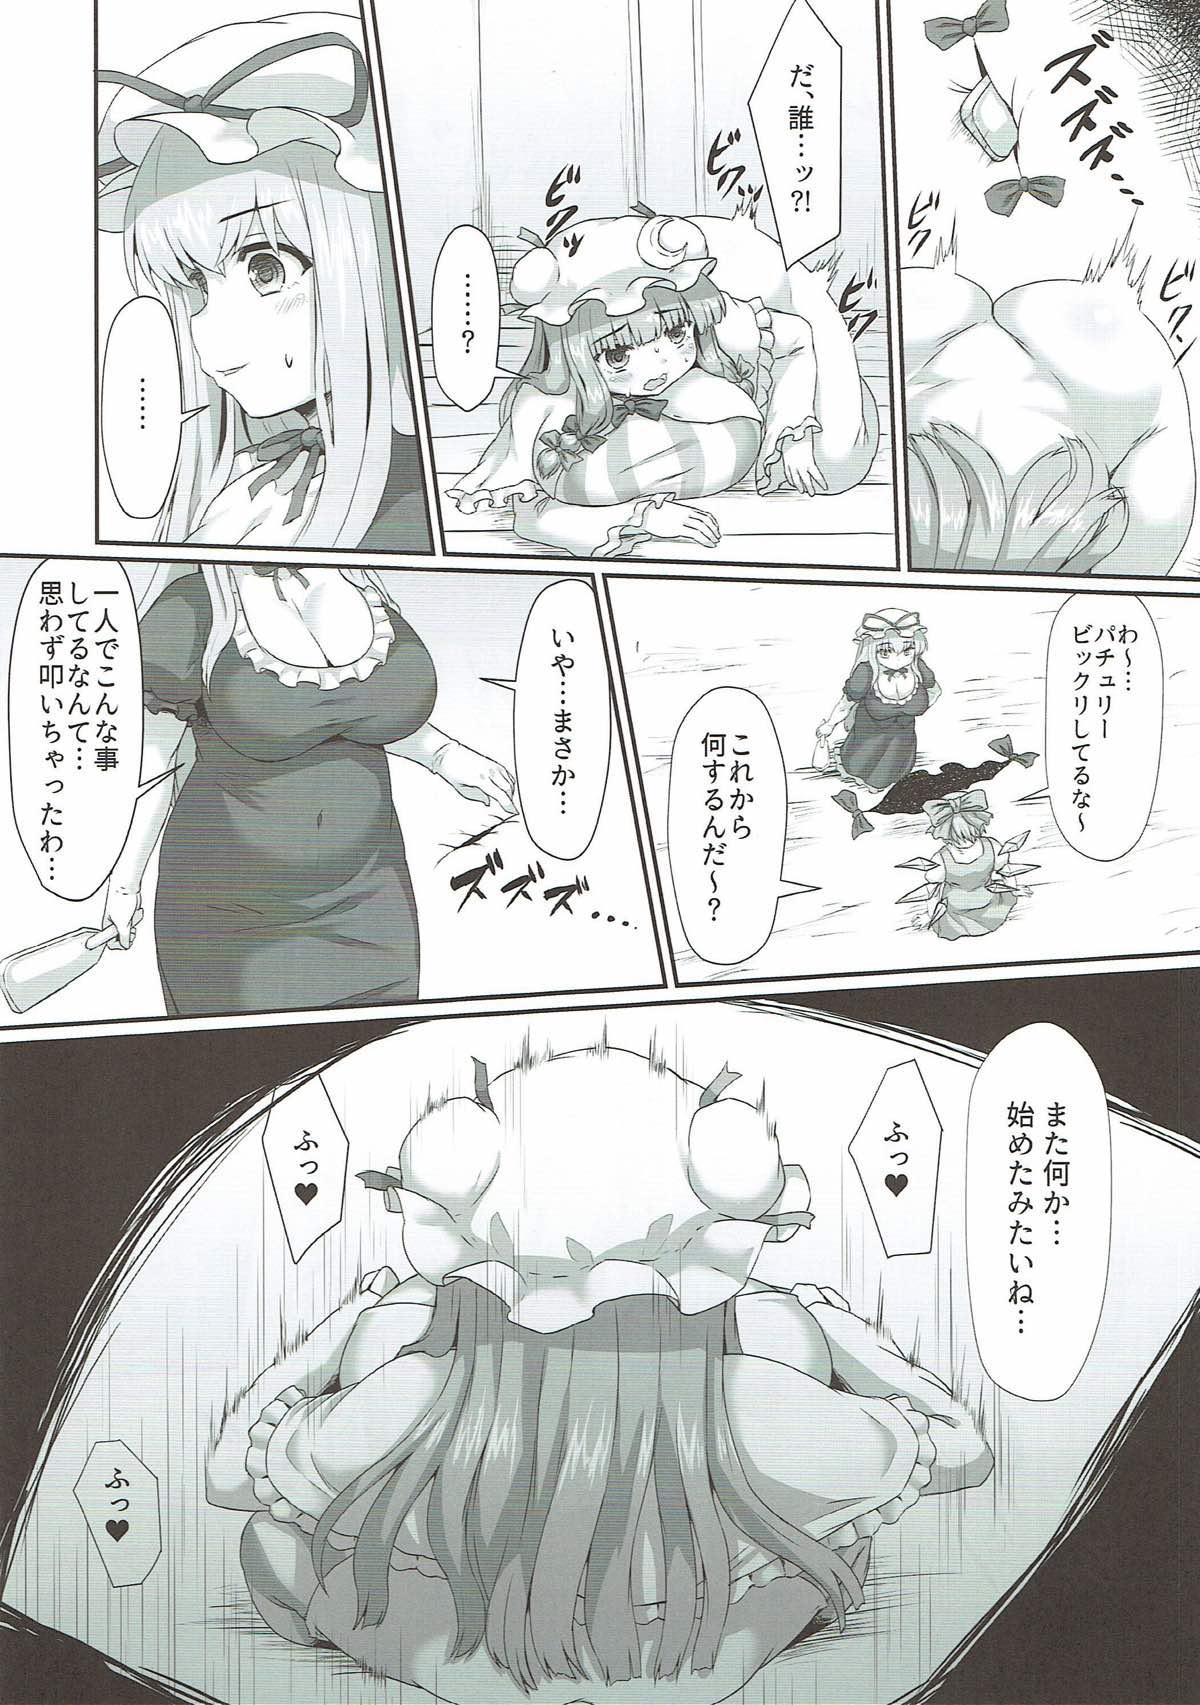 Amatur Porn パチュリーの尻穴本 - Touhou project Free Amature - Page 5